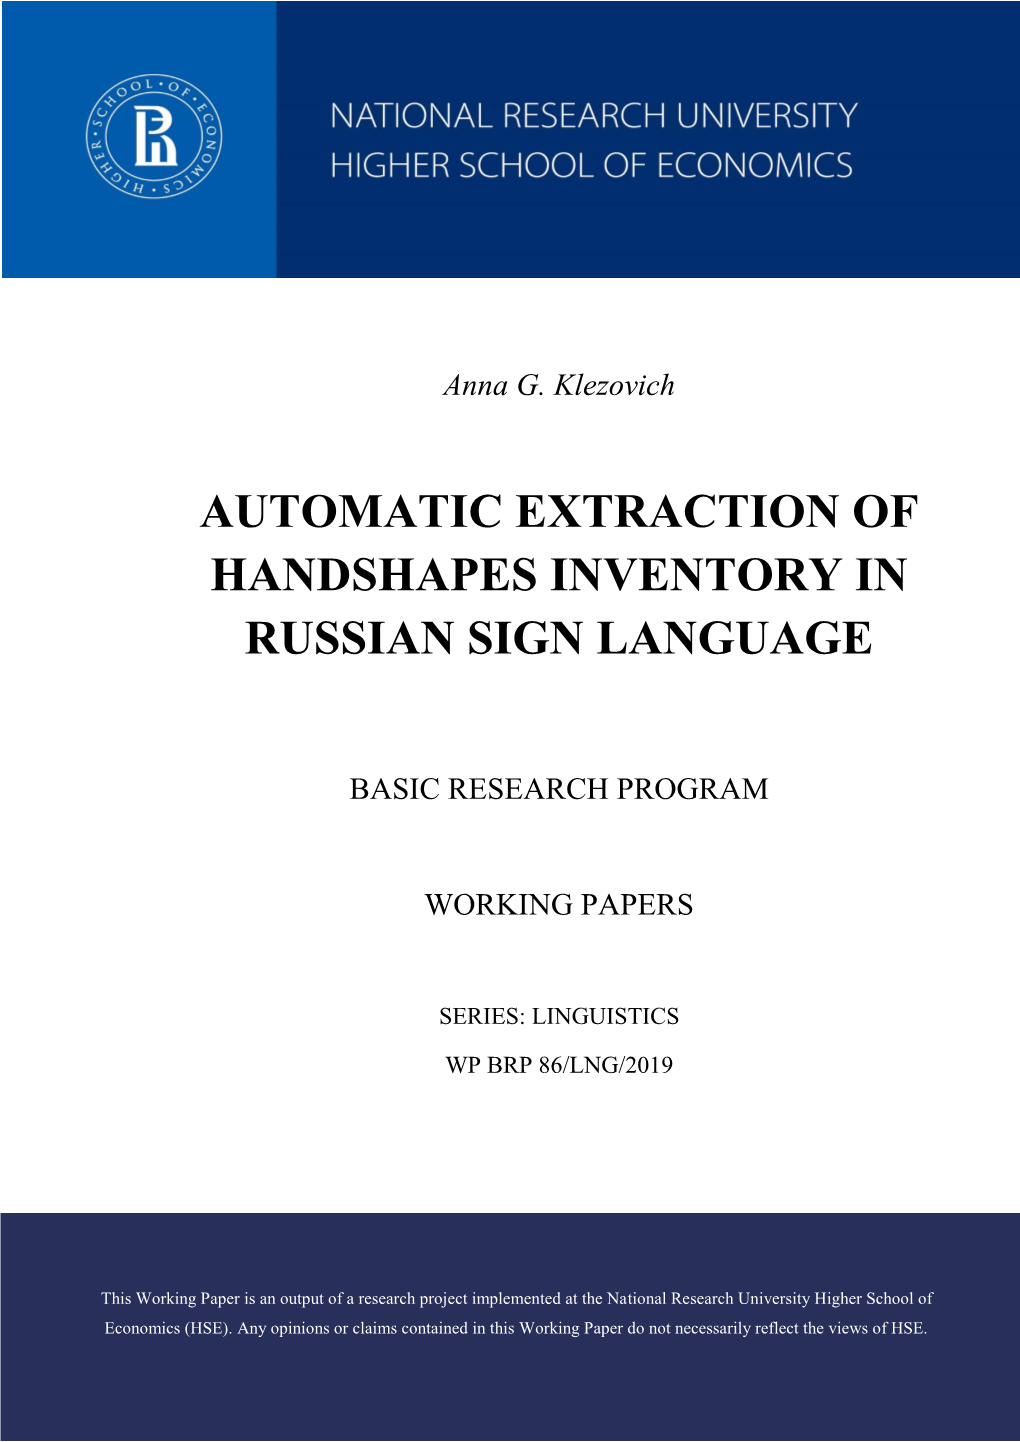 "Automatic Extraction of Handshapes Inventory in Russian Sign